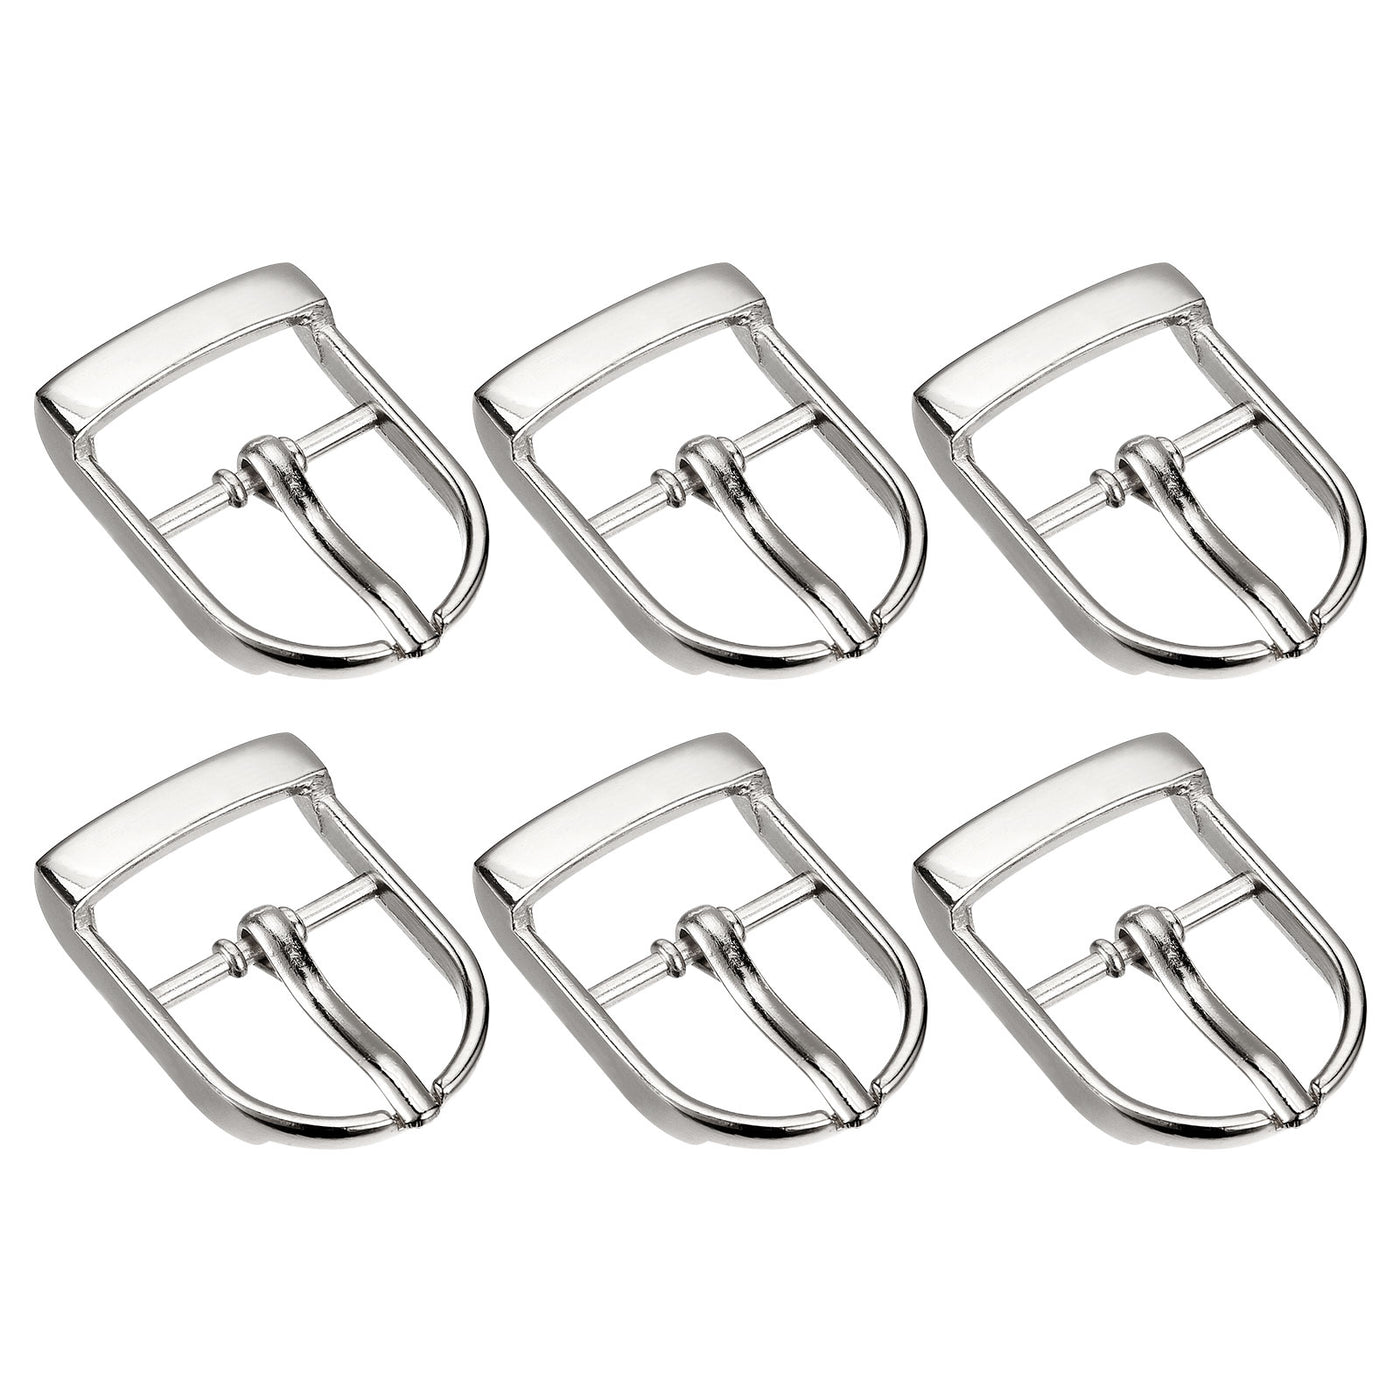 uxcell Uxcell 6Pcs 0.75" Single Prong Belt Buckle Oval Center Bar Buckles for Belts, Silver